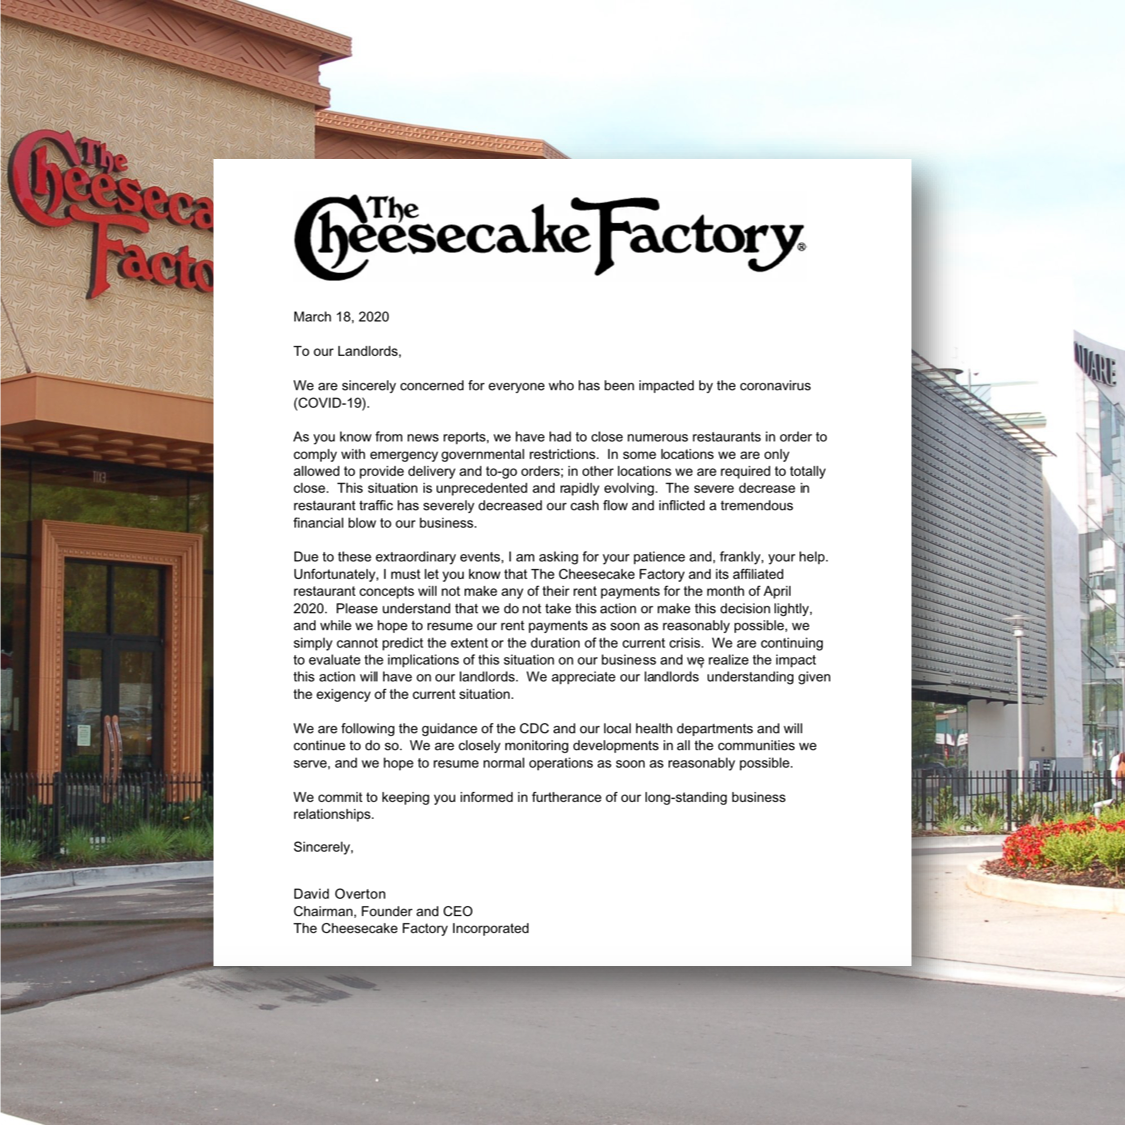 The Cheesecake Factory Sends Letter Telling Lenox Square It Won't